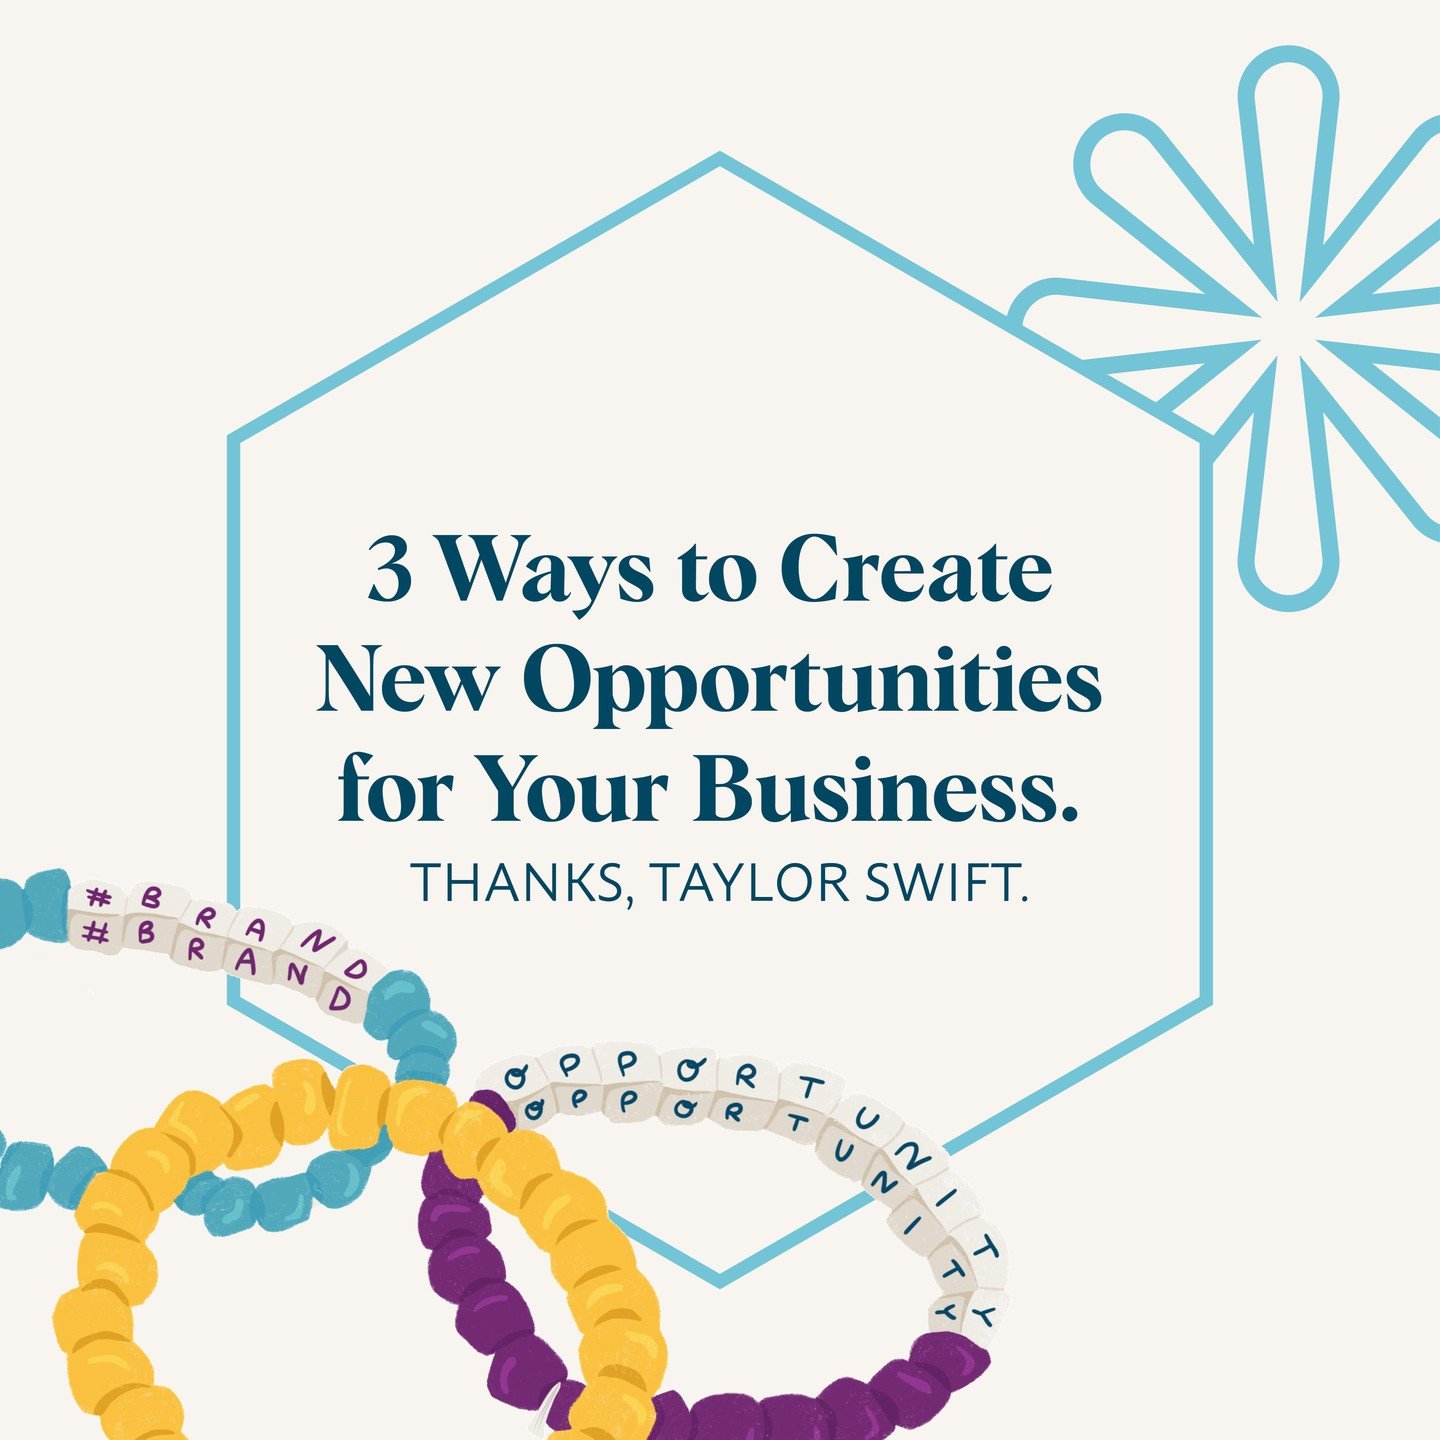 Tapping into the excitement of major events like Taylor Swift&rsquo;s Eras tour, the Olympics, or the 2026 FIFA World Cup, is just one way to create new business opportunities and raise awareness for your brand, but the real magic is having a curious